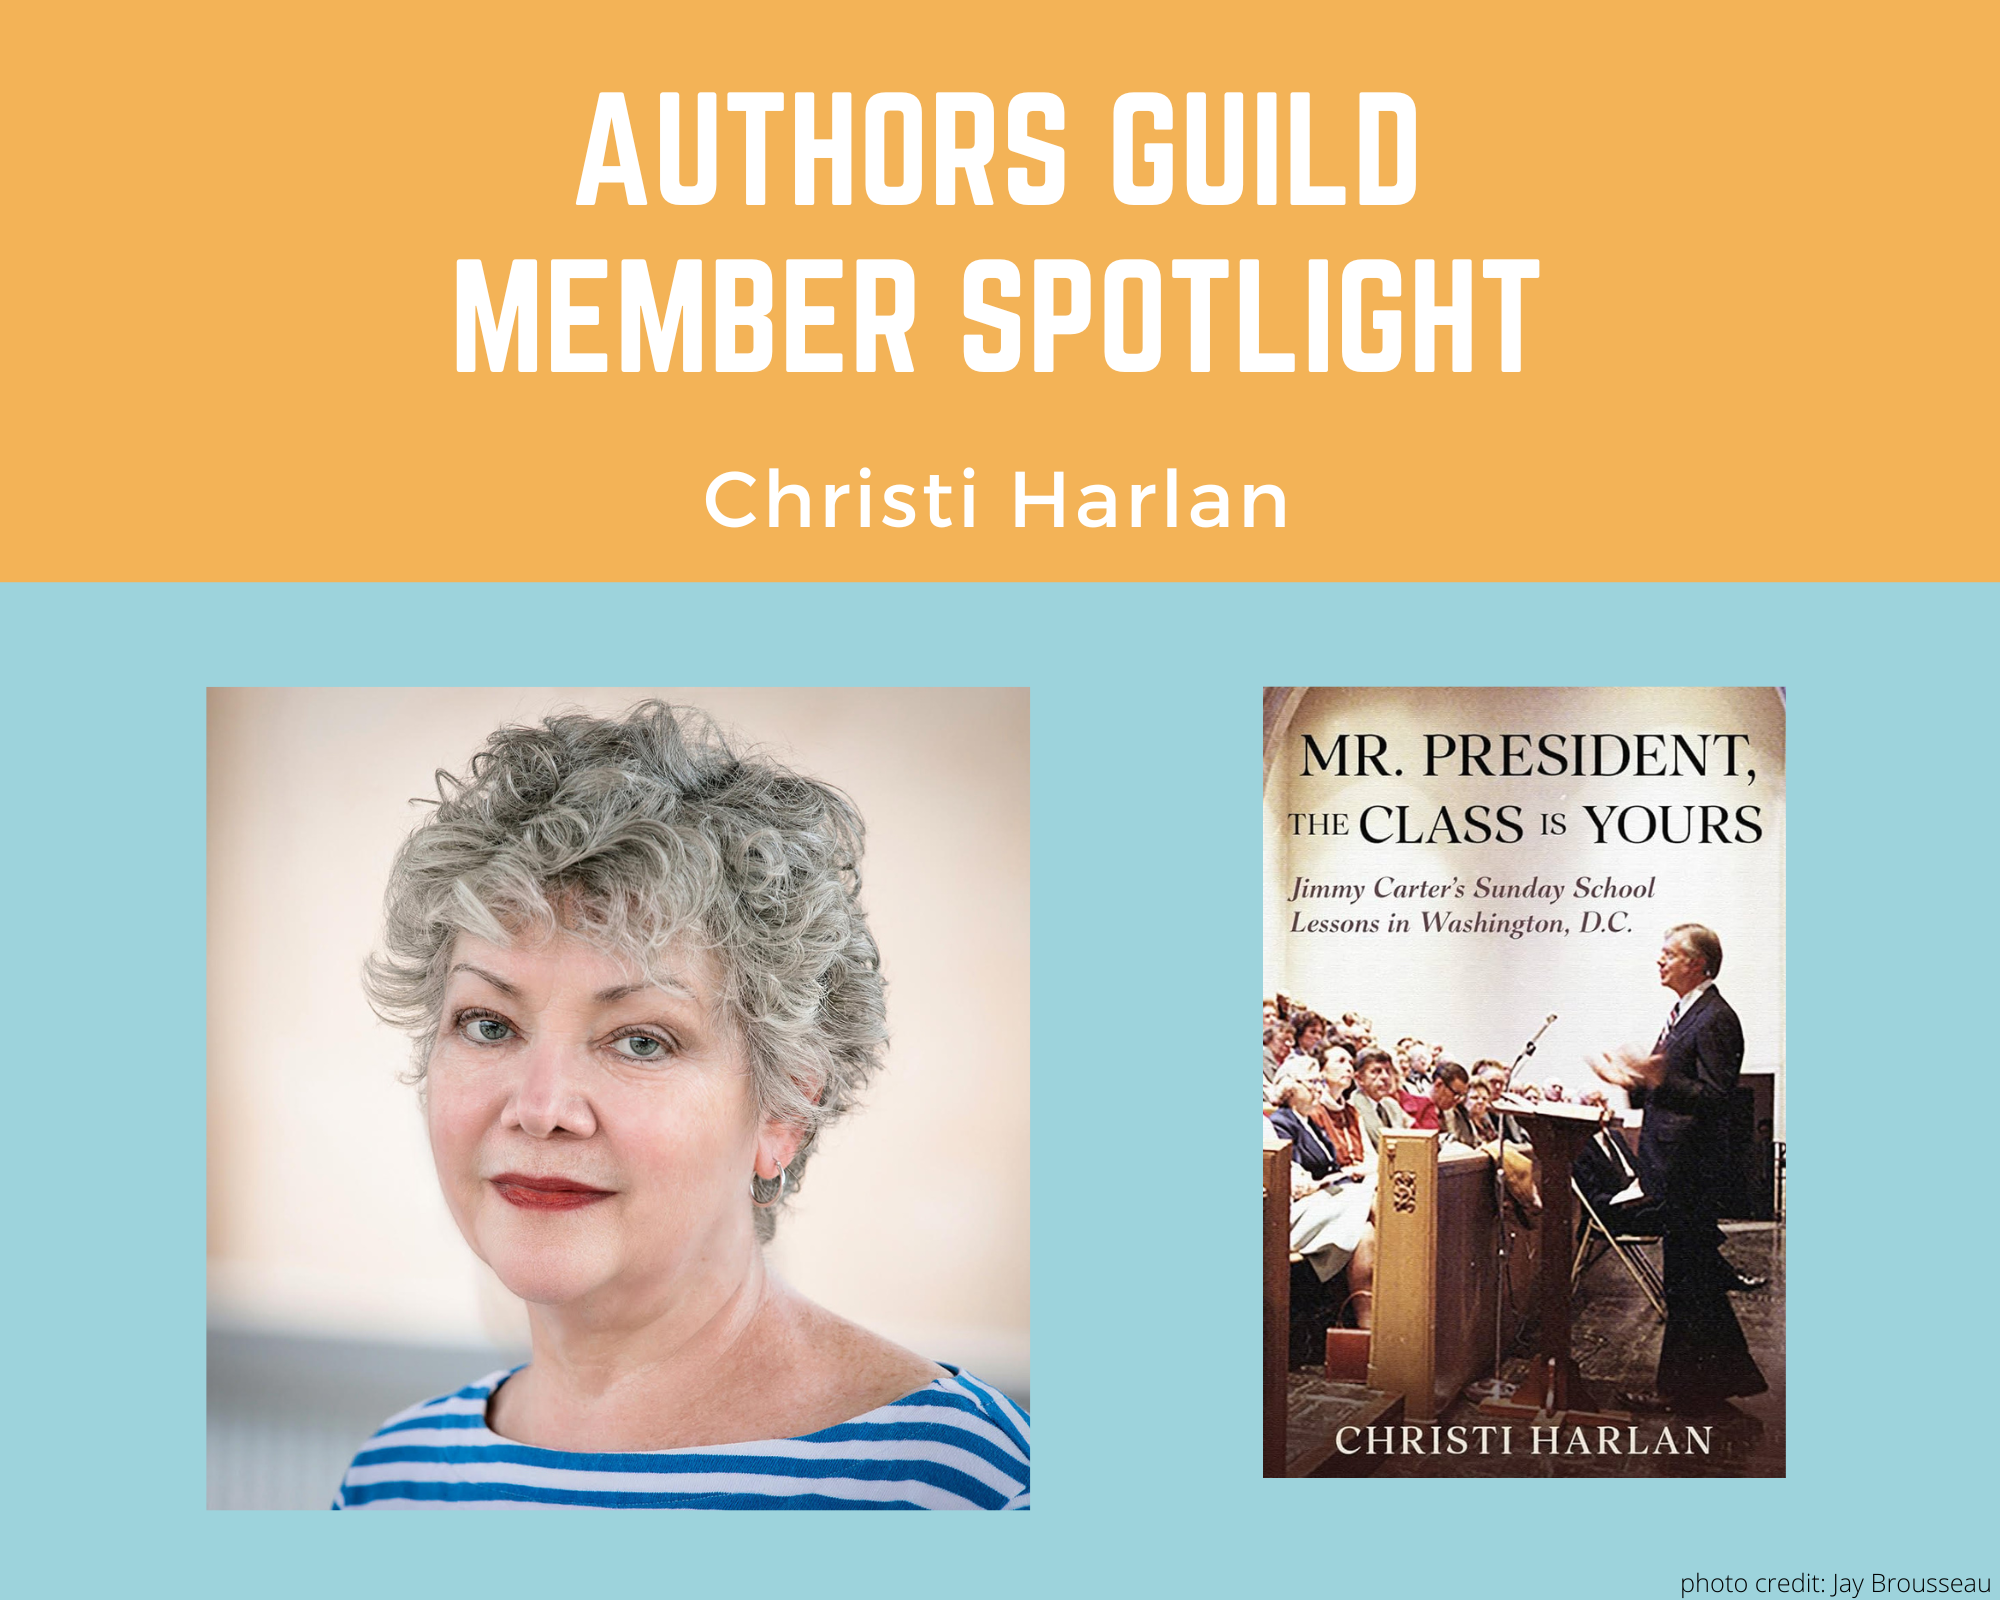 author Christi Harlan and her book Mr. President, The Class Is Yours